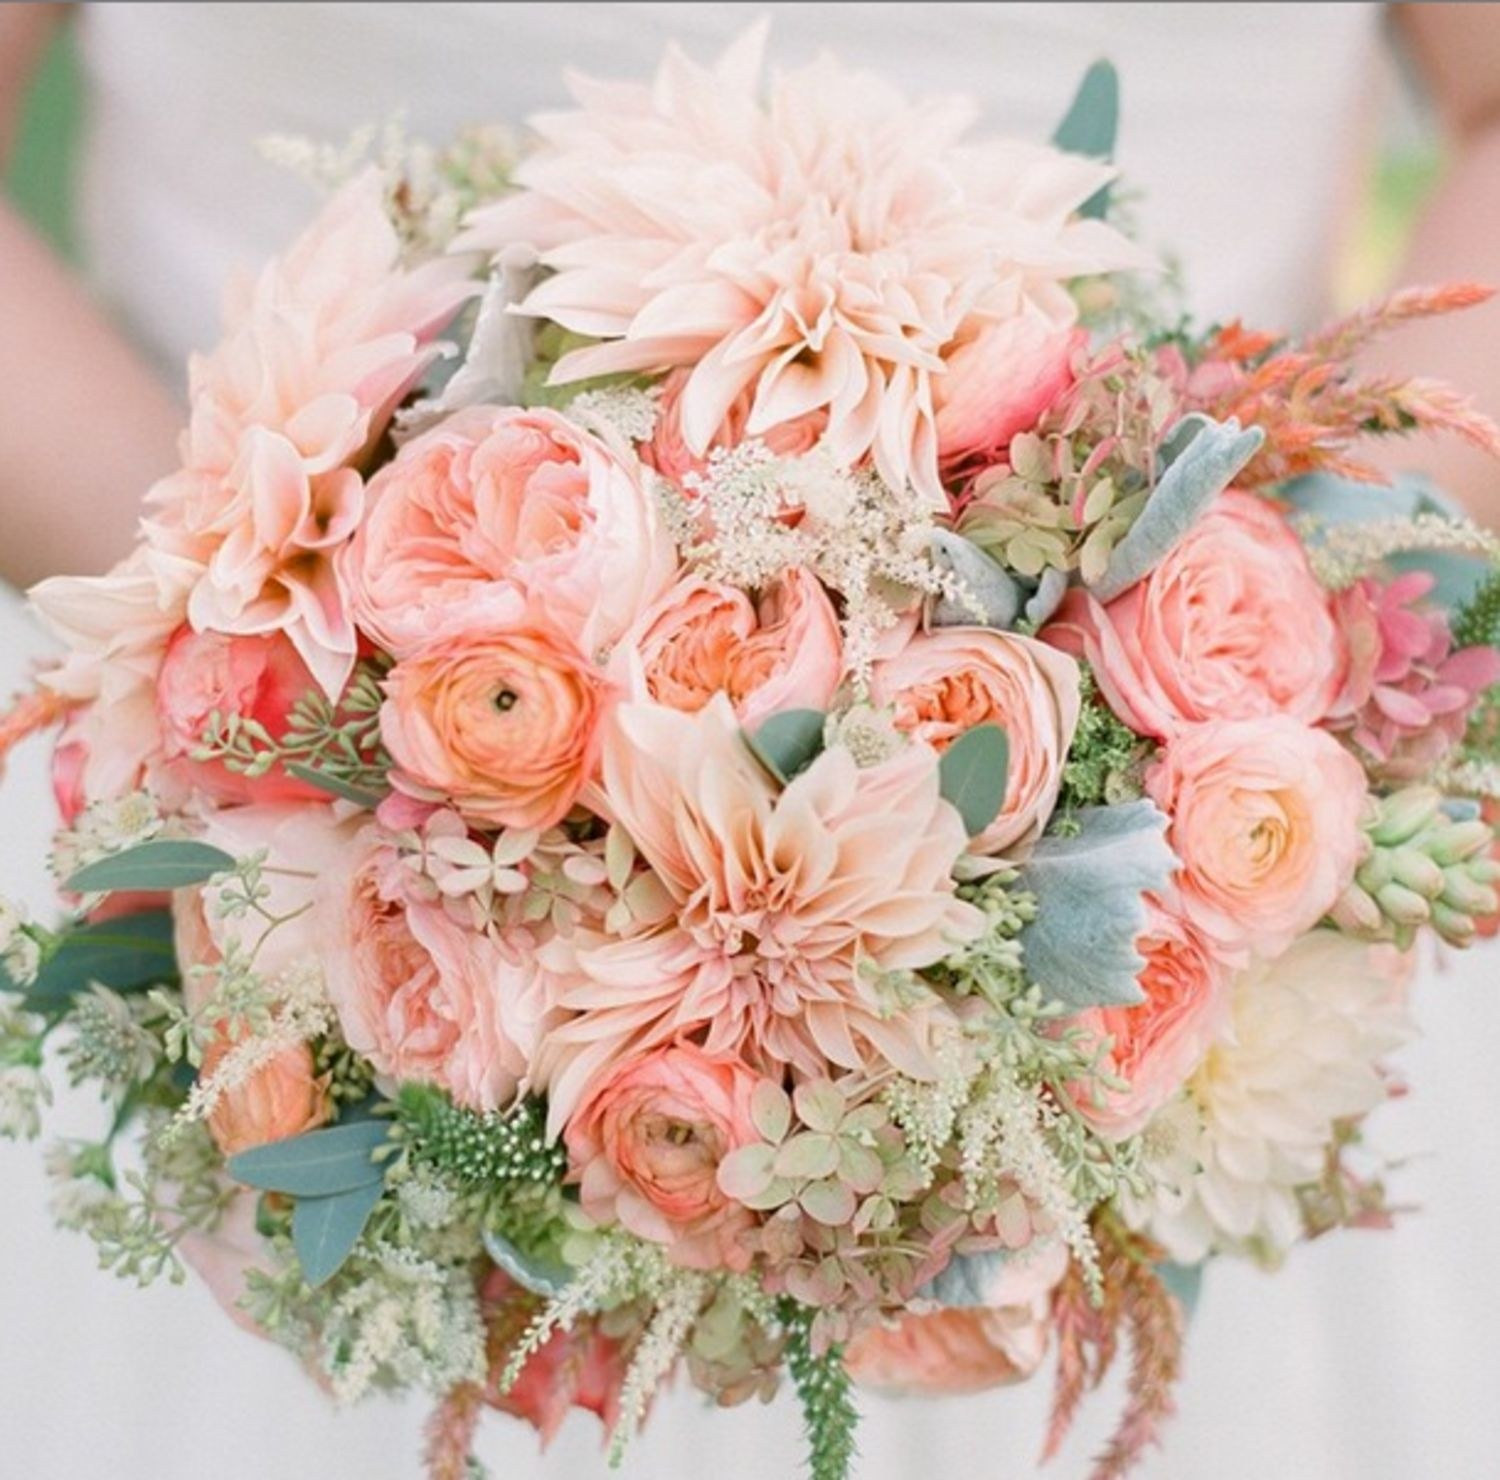 Wedding Flowers Bridal Bouquet
 Best Wedding Flowers 13 Gorgeous Bridal Bouquets in Every